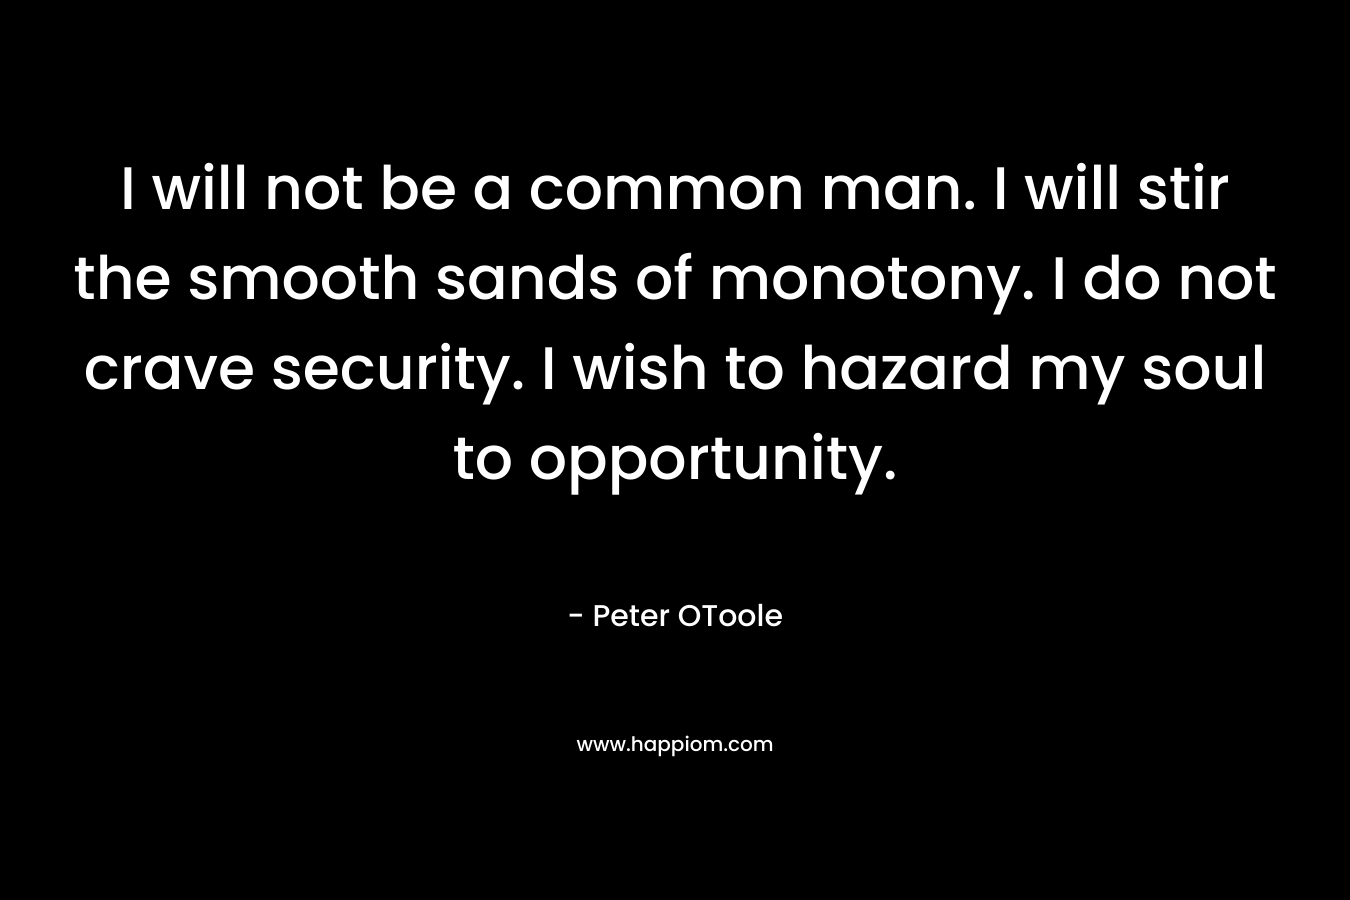 I will not be a common man. I will stir the smooth sands of monotony. I do not crave security. I wish to hazard my soul to opportunity. – Peter OToole